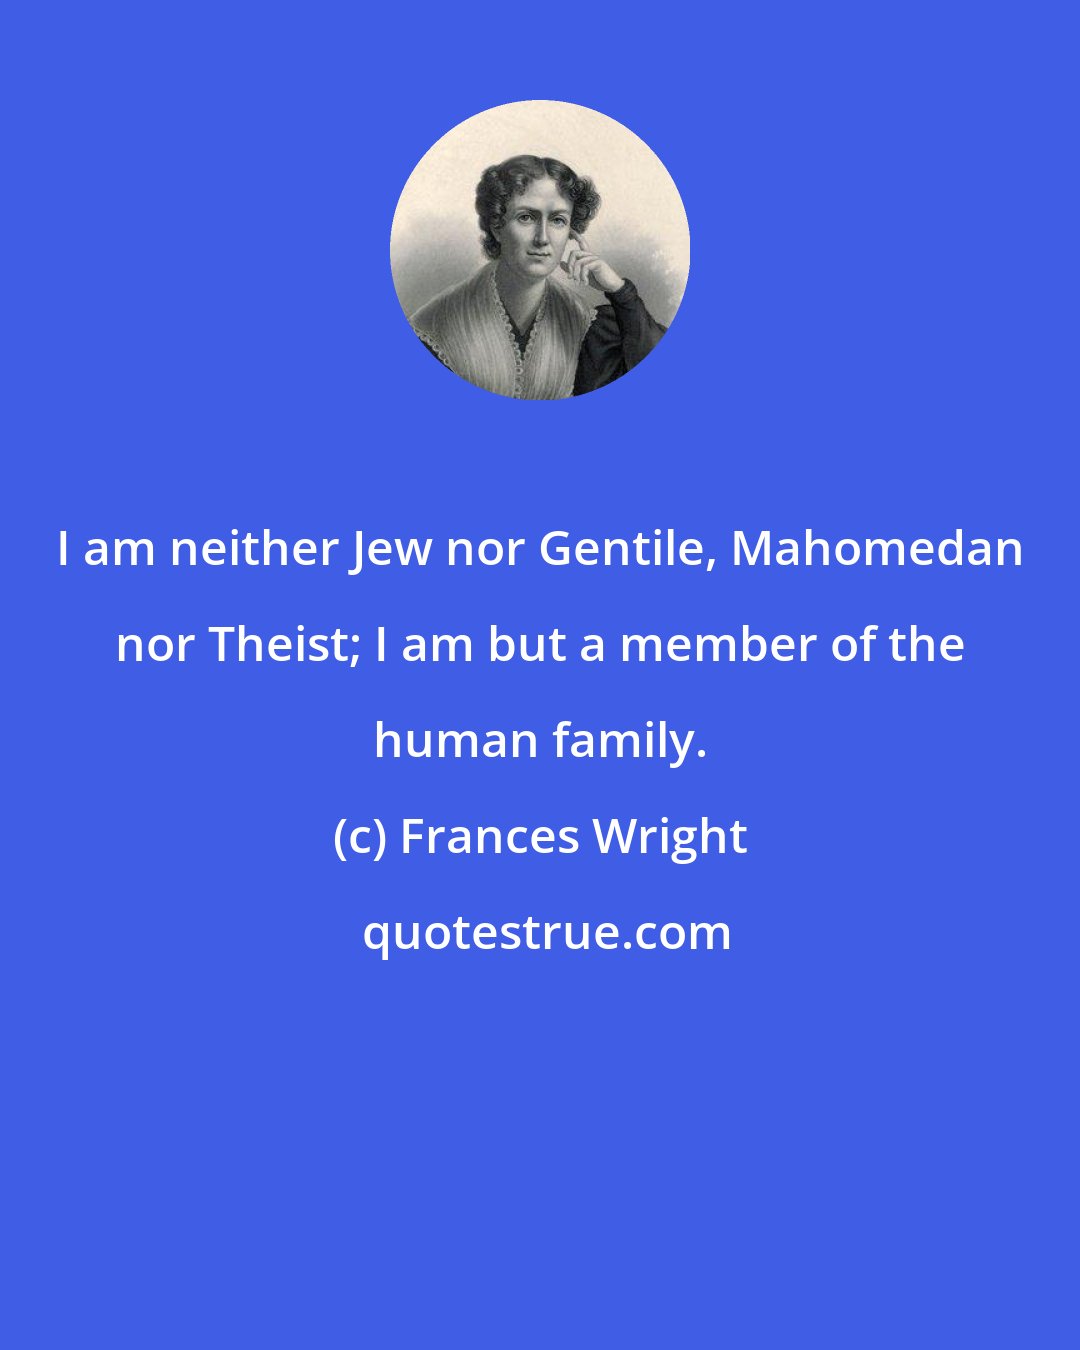 Frances Wright: I am neither Jew nor Gentile, Mahomedan nor Theist; I am but a member of the human family.